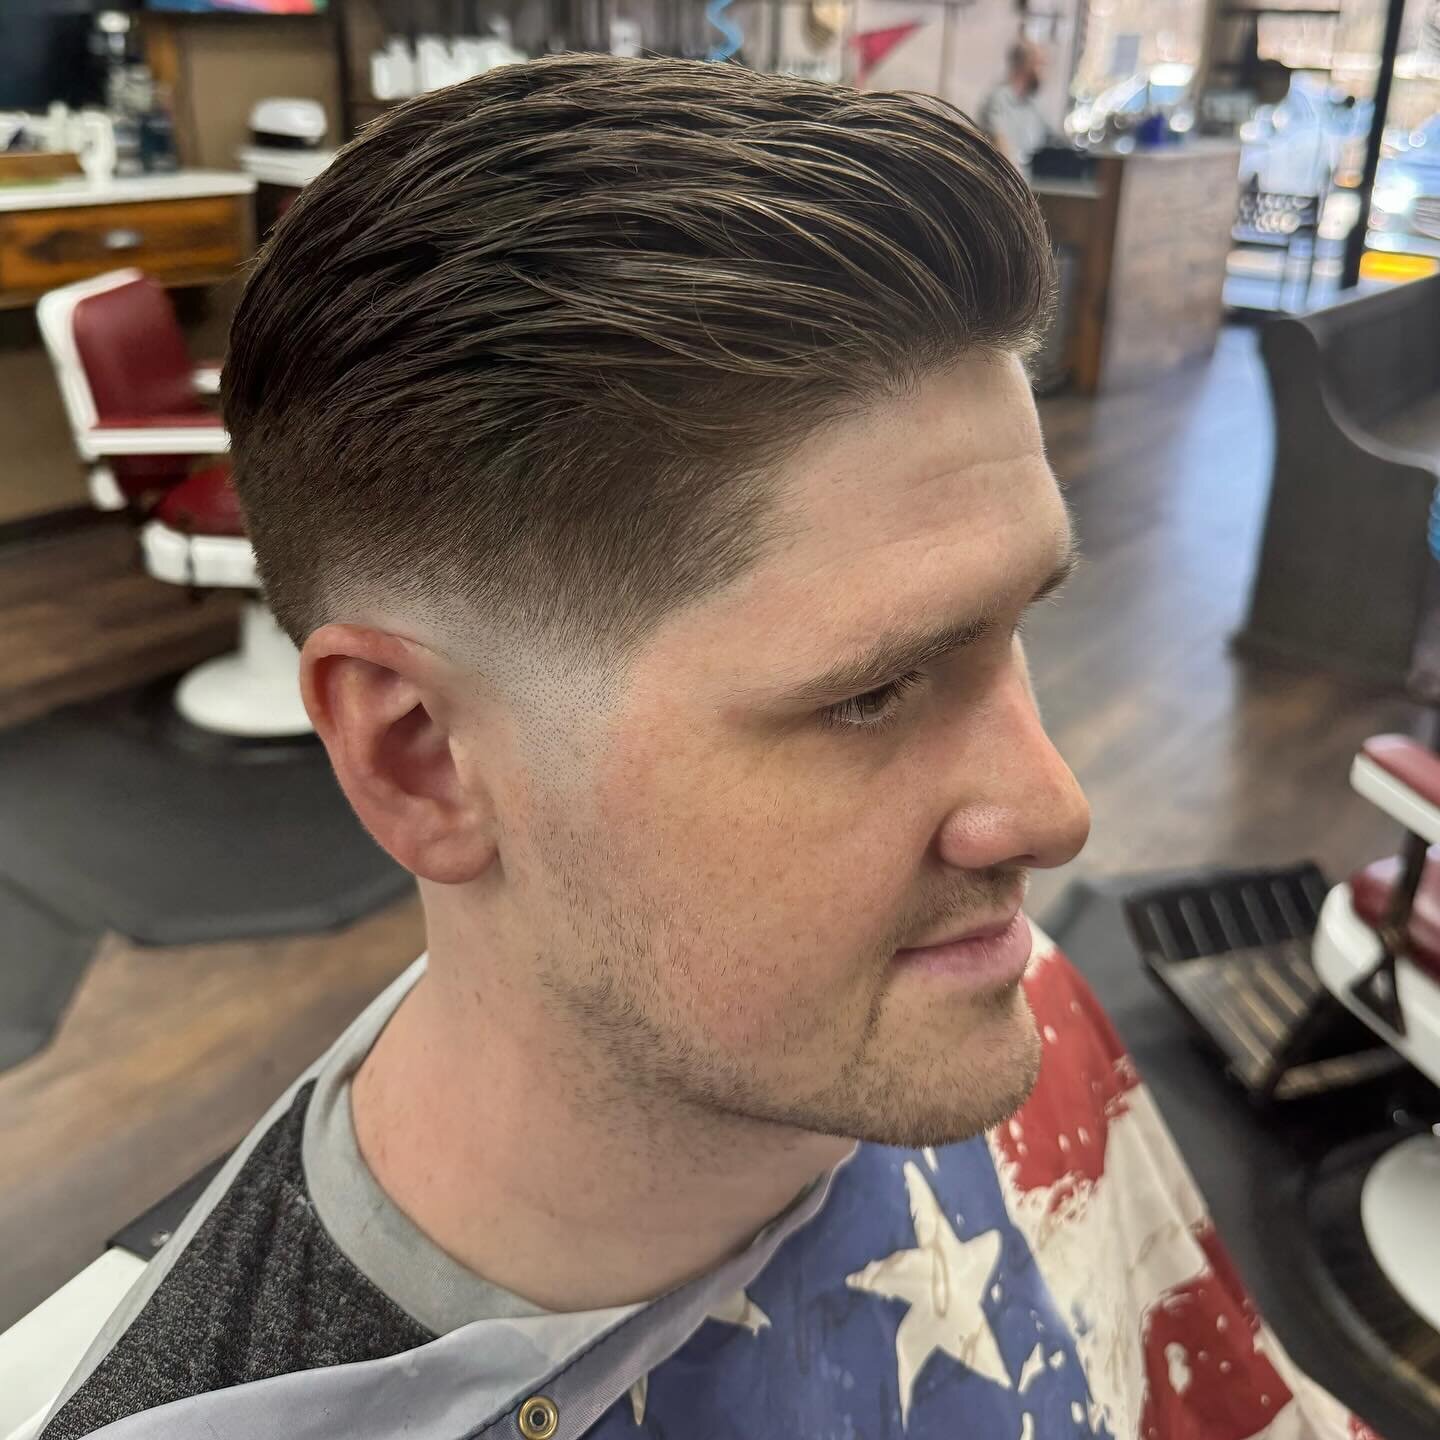 Nothing like a fresh fade!  Michel Nemets got faded by The Slayer (Javier) at our Ansley shop.  Styled with @oilcangrooming Crafting Clay. 
.
#atlantabarber #menshair #menshaircut #barbershop #atlanta #haircut #barber #americanhaircuts  #americanbarb